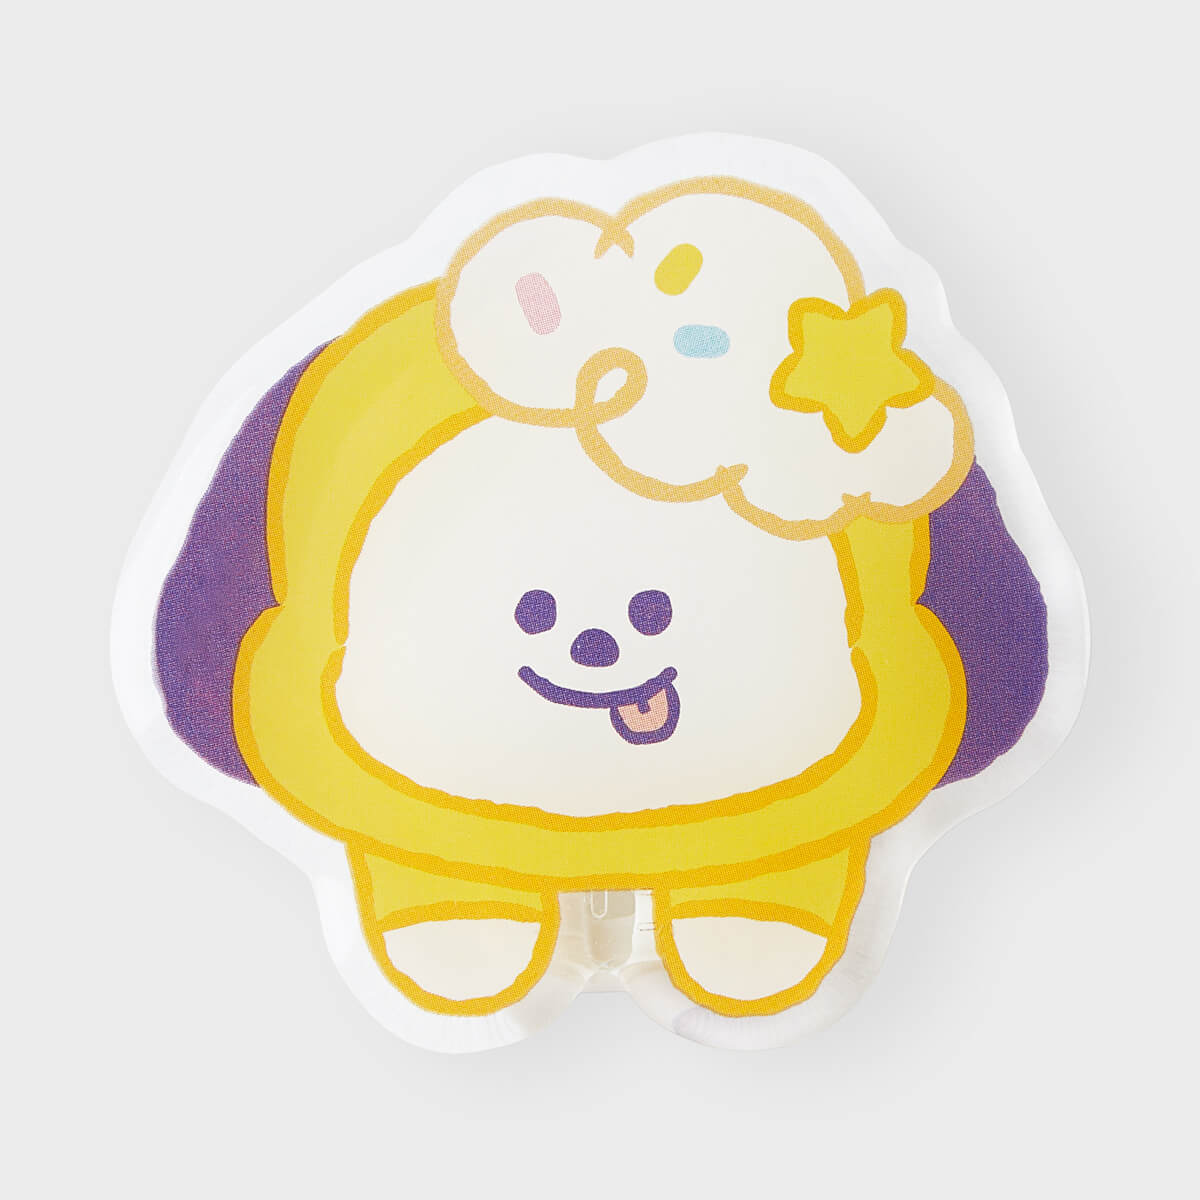 BT21 CHIMMY On the Cloud Acrylic Clip Magnet